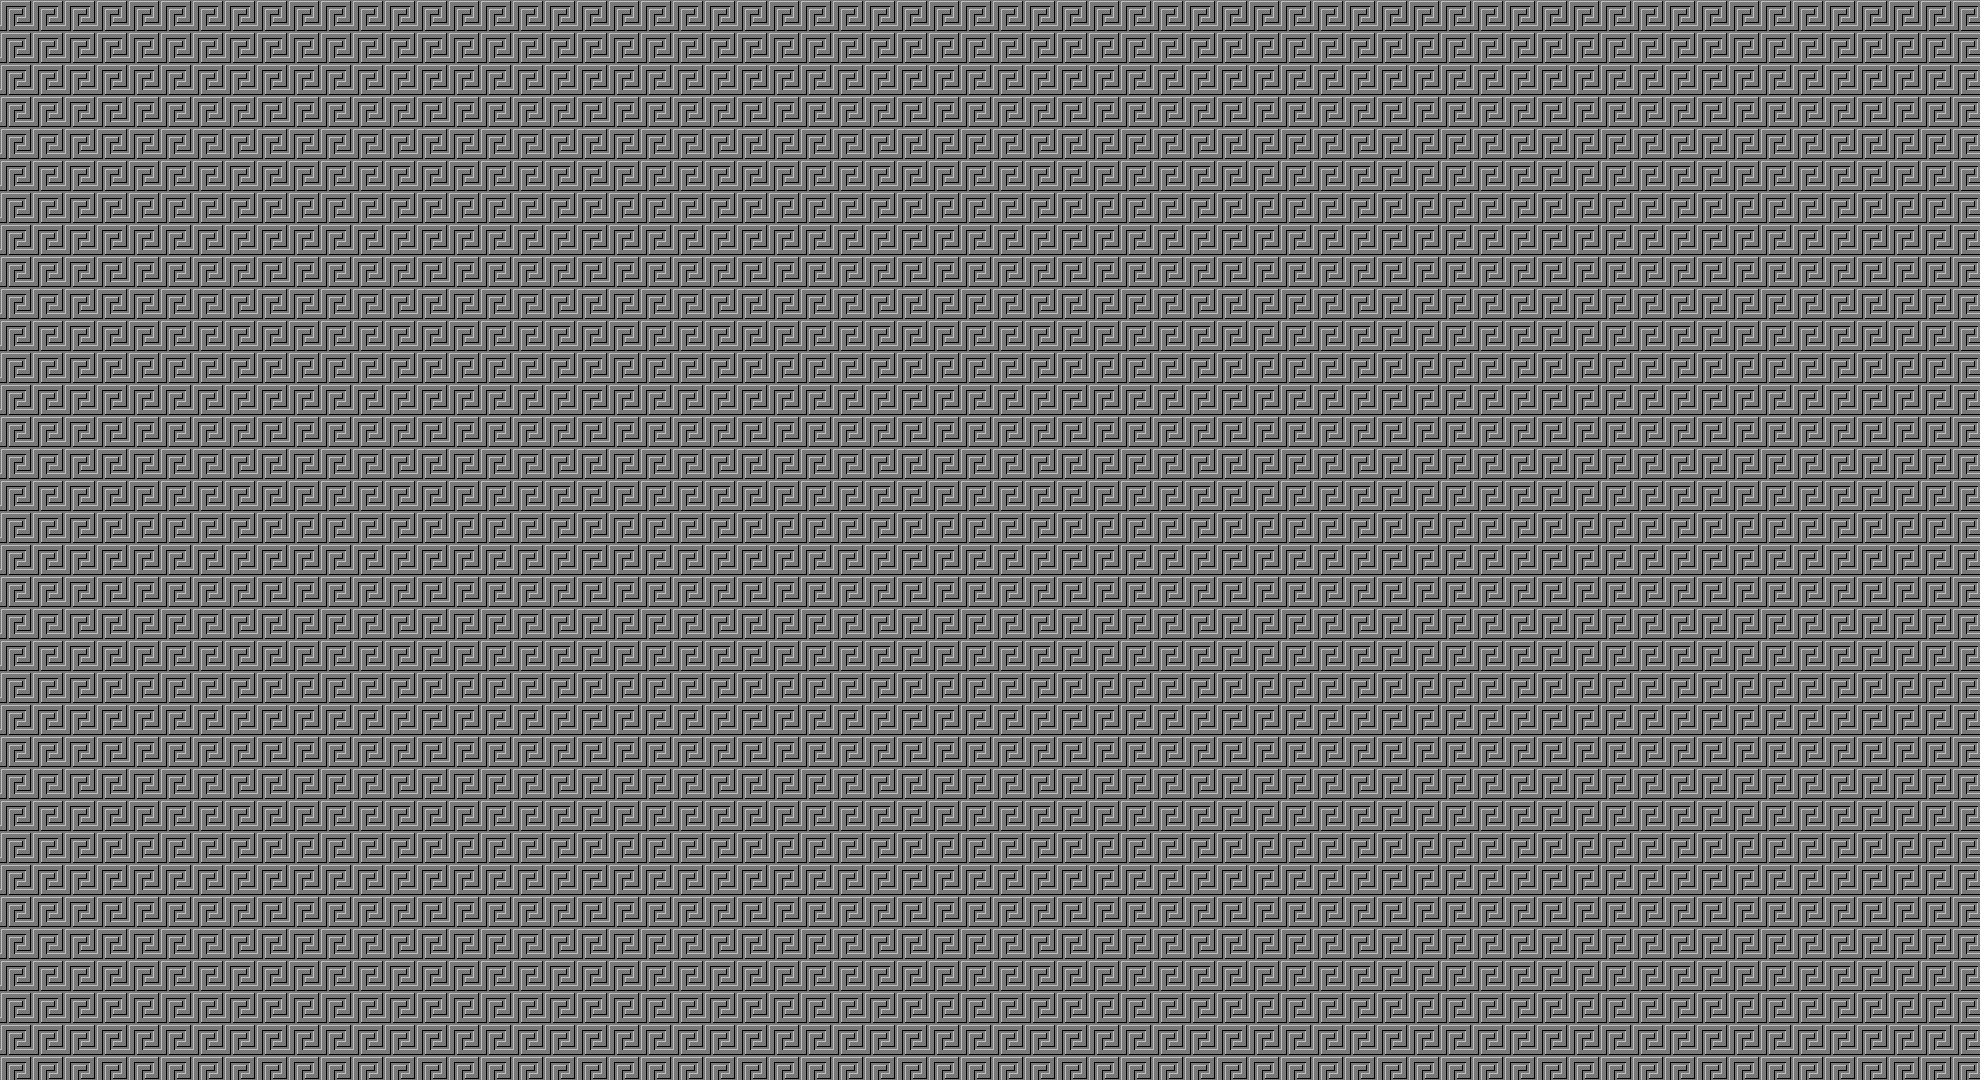 A green background with a repeating pattern of squares - Windows 95